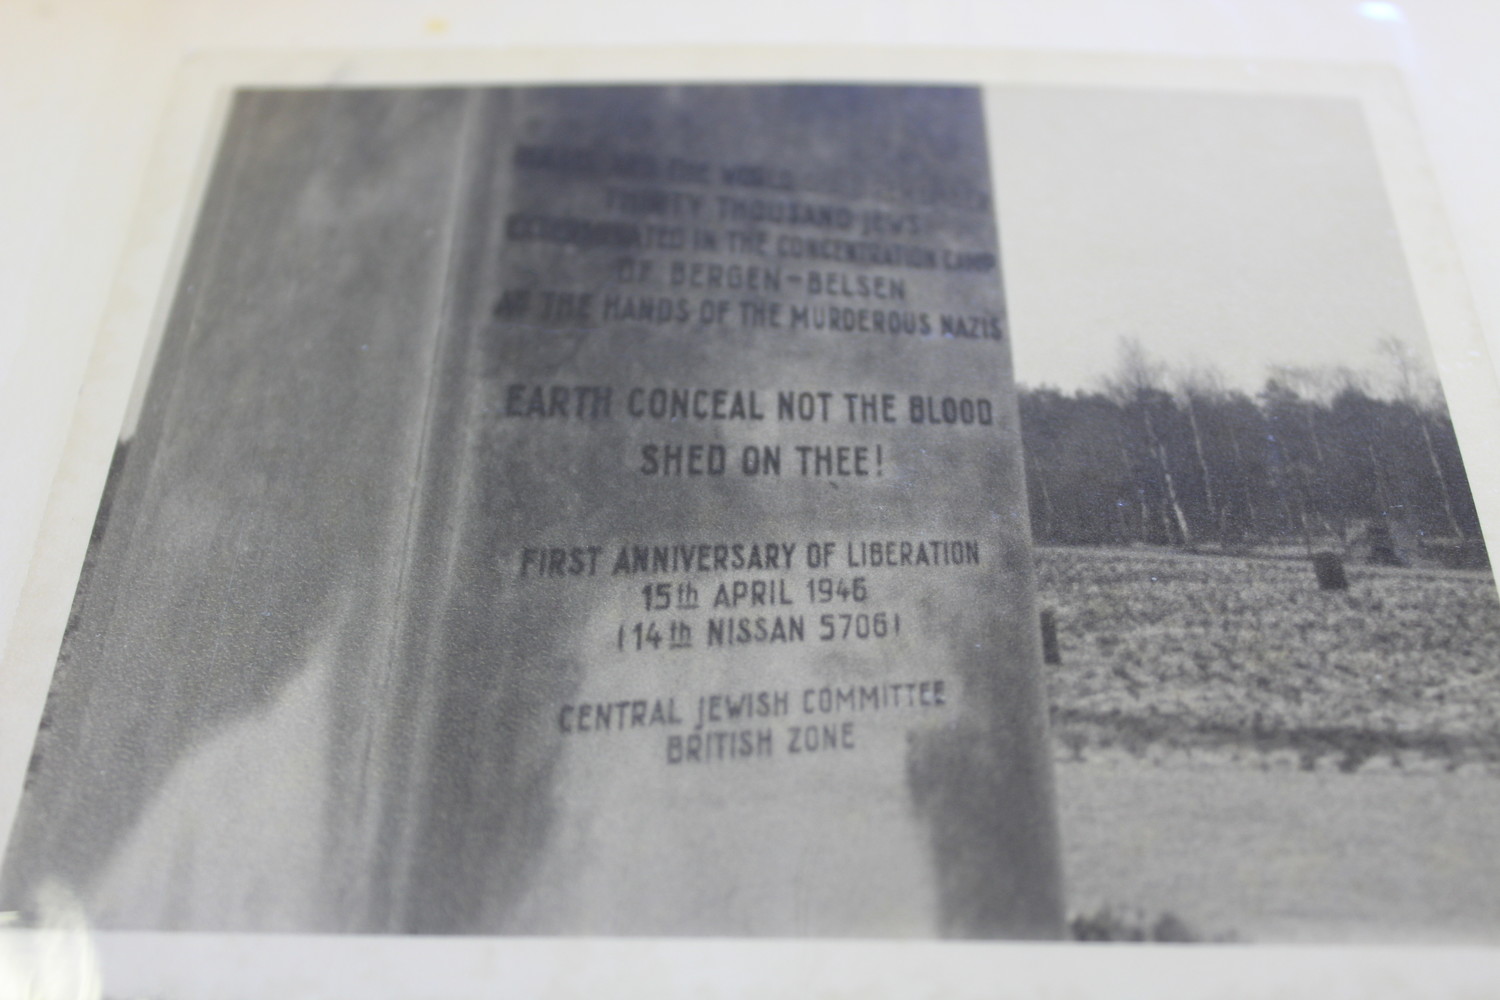 The Bergen-Belsen sign at the entrance to the notorious concentration camp that so moved Maness while stationed in Germany.